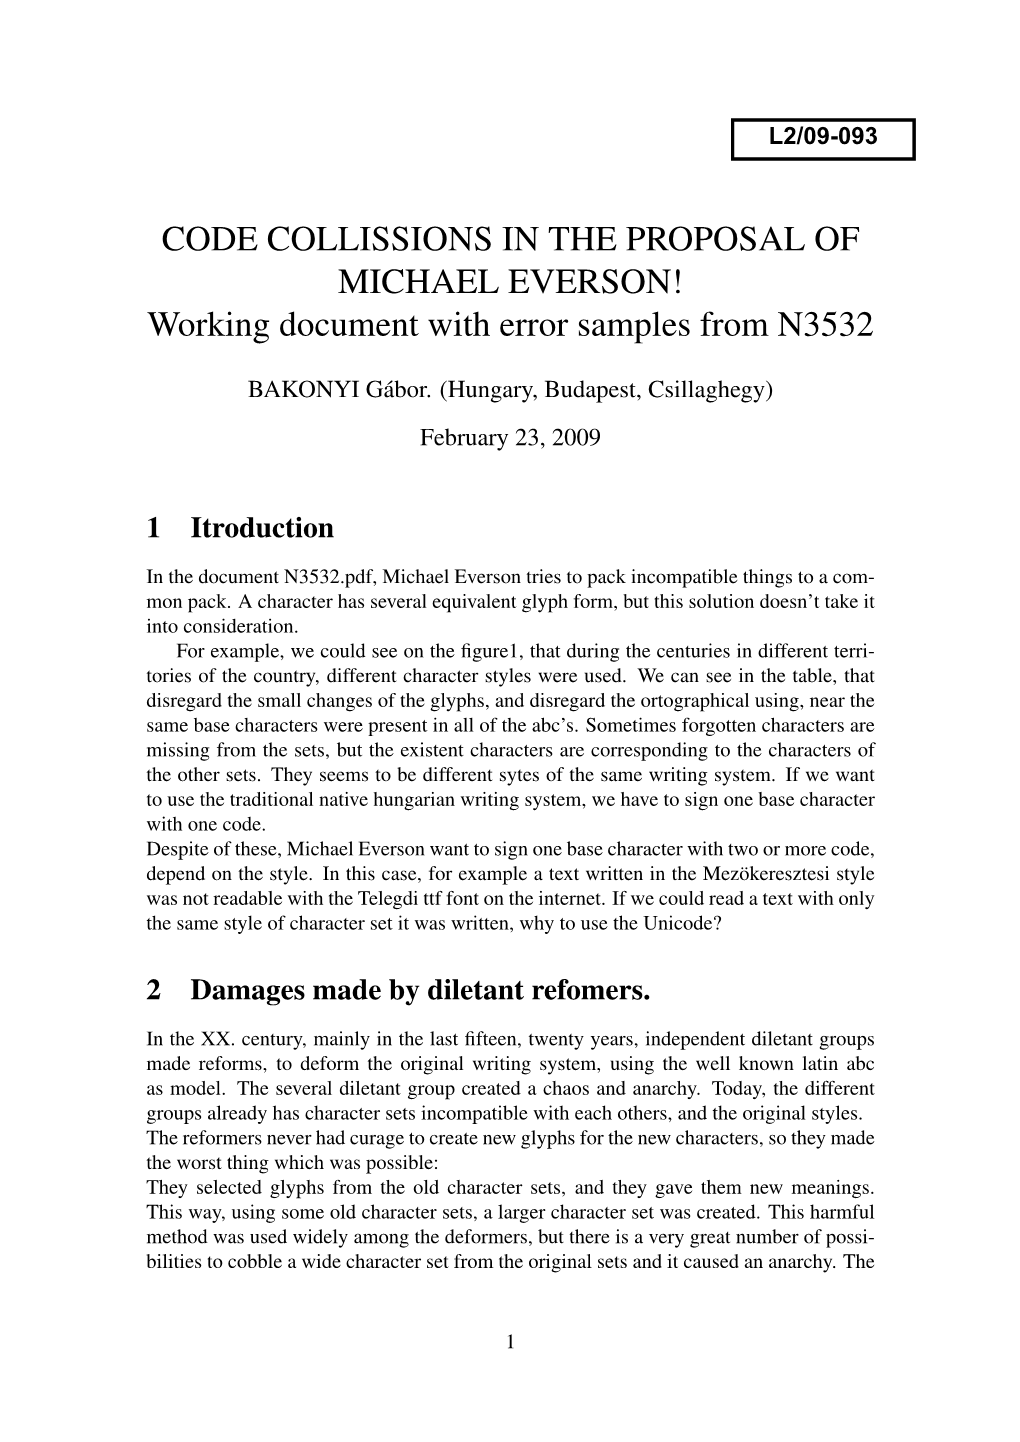 CODE COLLISSIONS in the PROPOSAL of MICHAEL EVERSON! Working Document with Error Samples from N3532